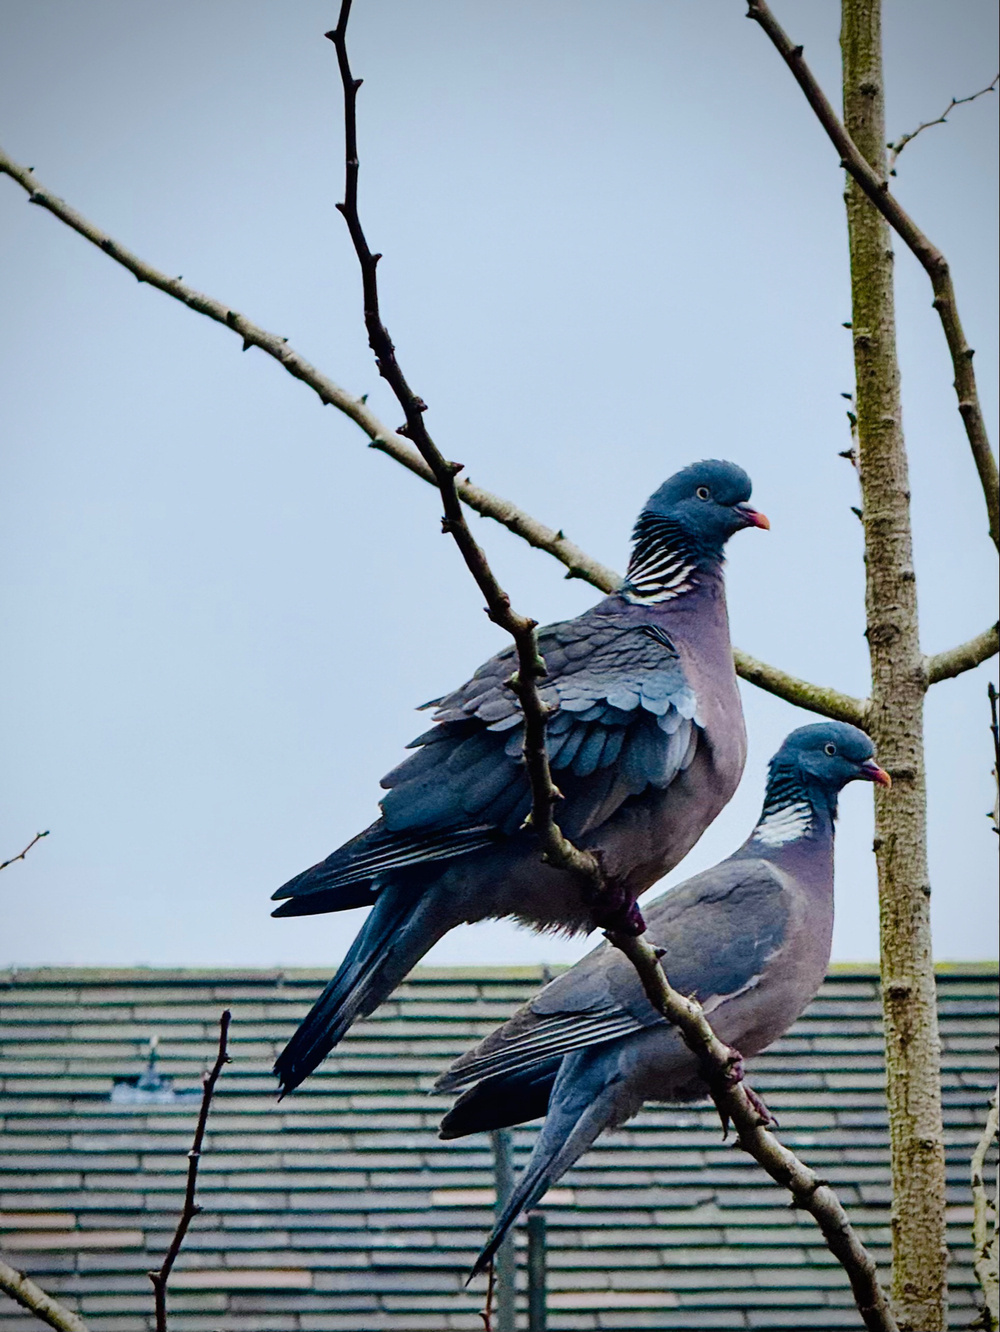 Two pigeons perched on the bare branches of a tree with a clear sky and a building roof in the background.